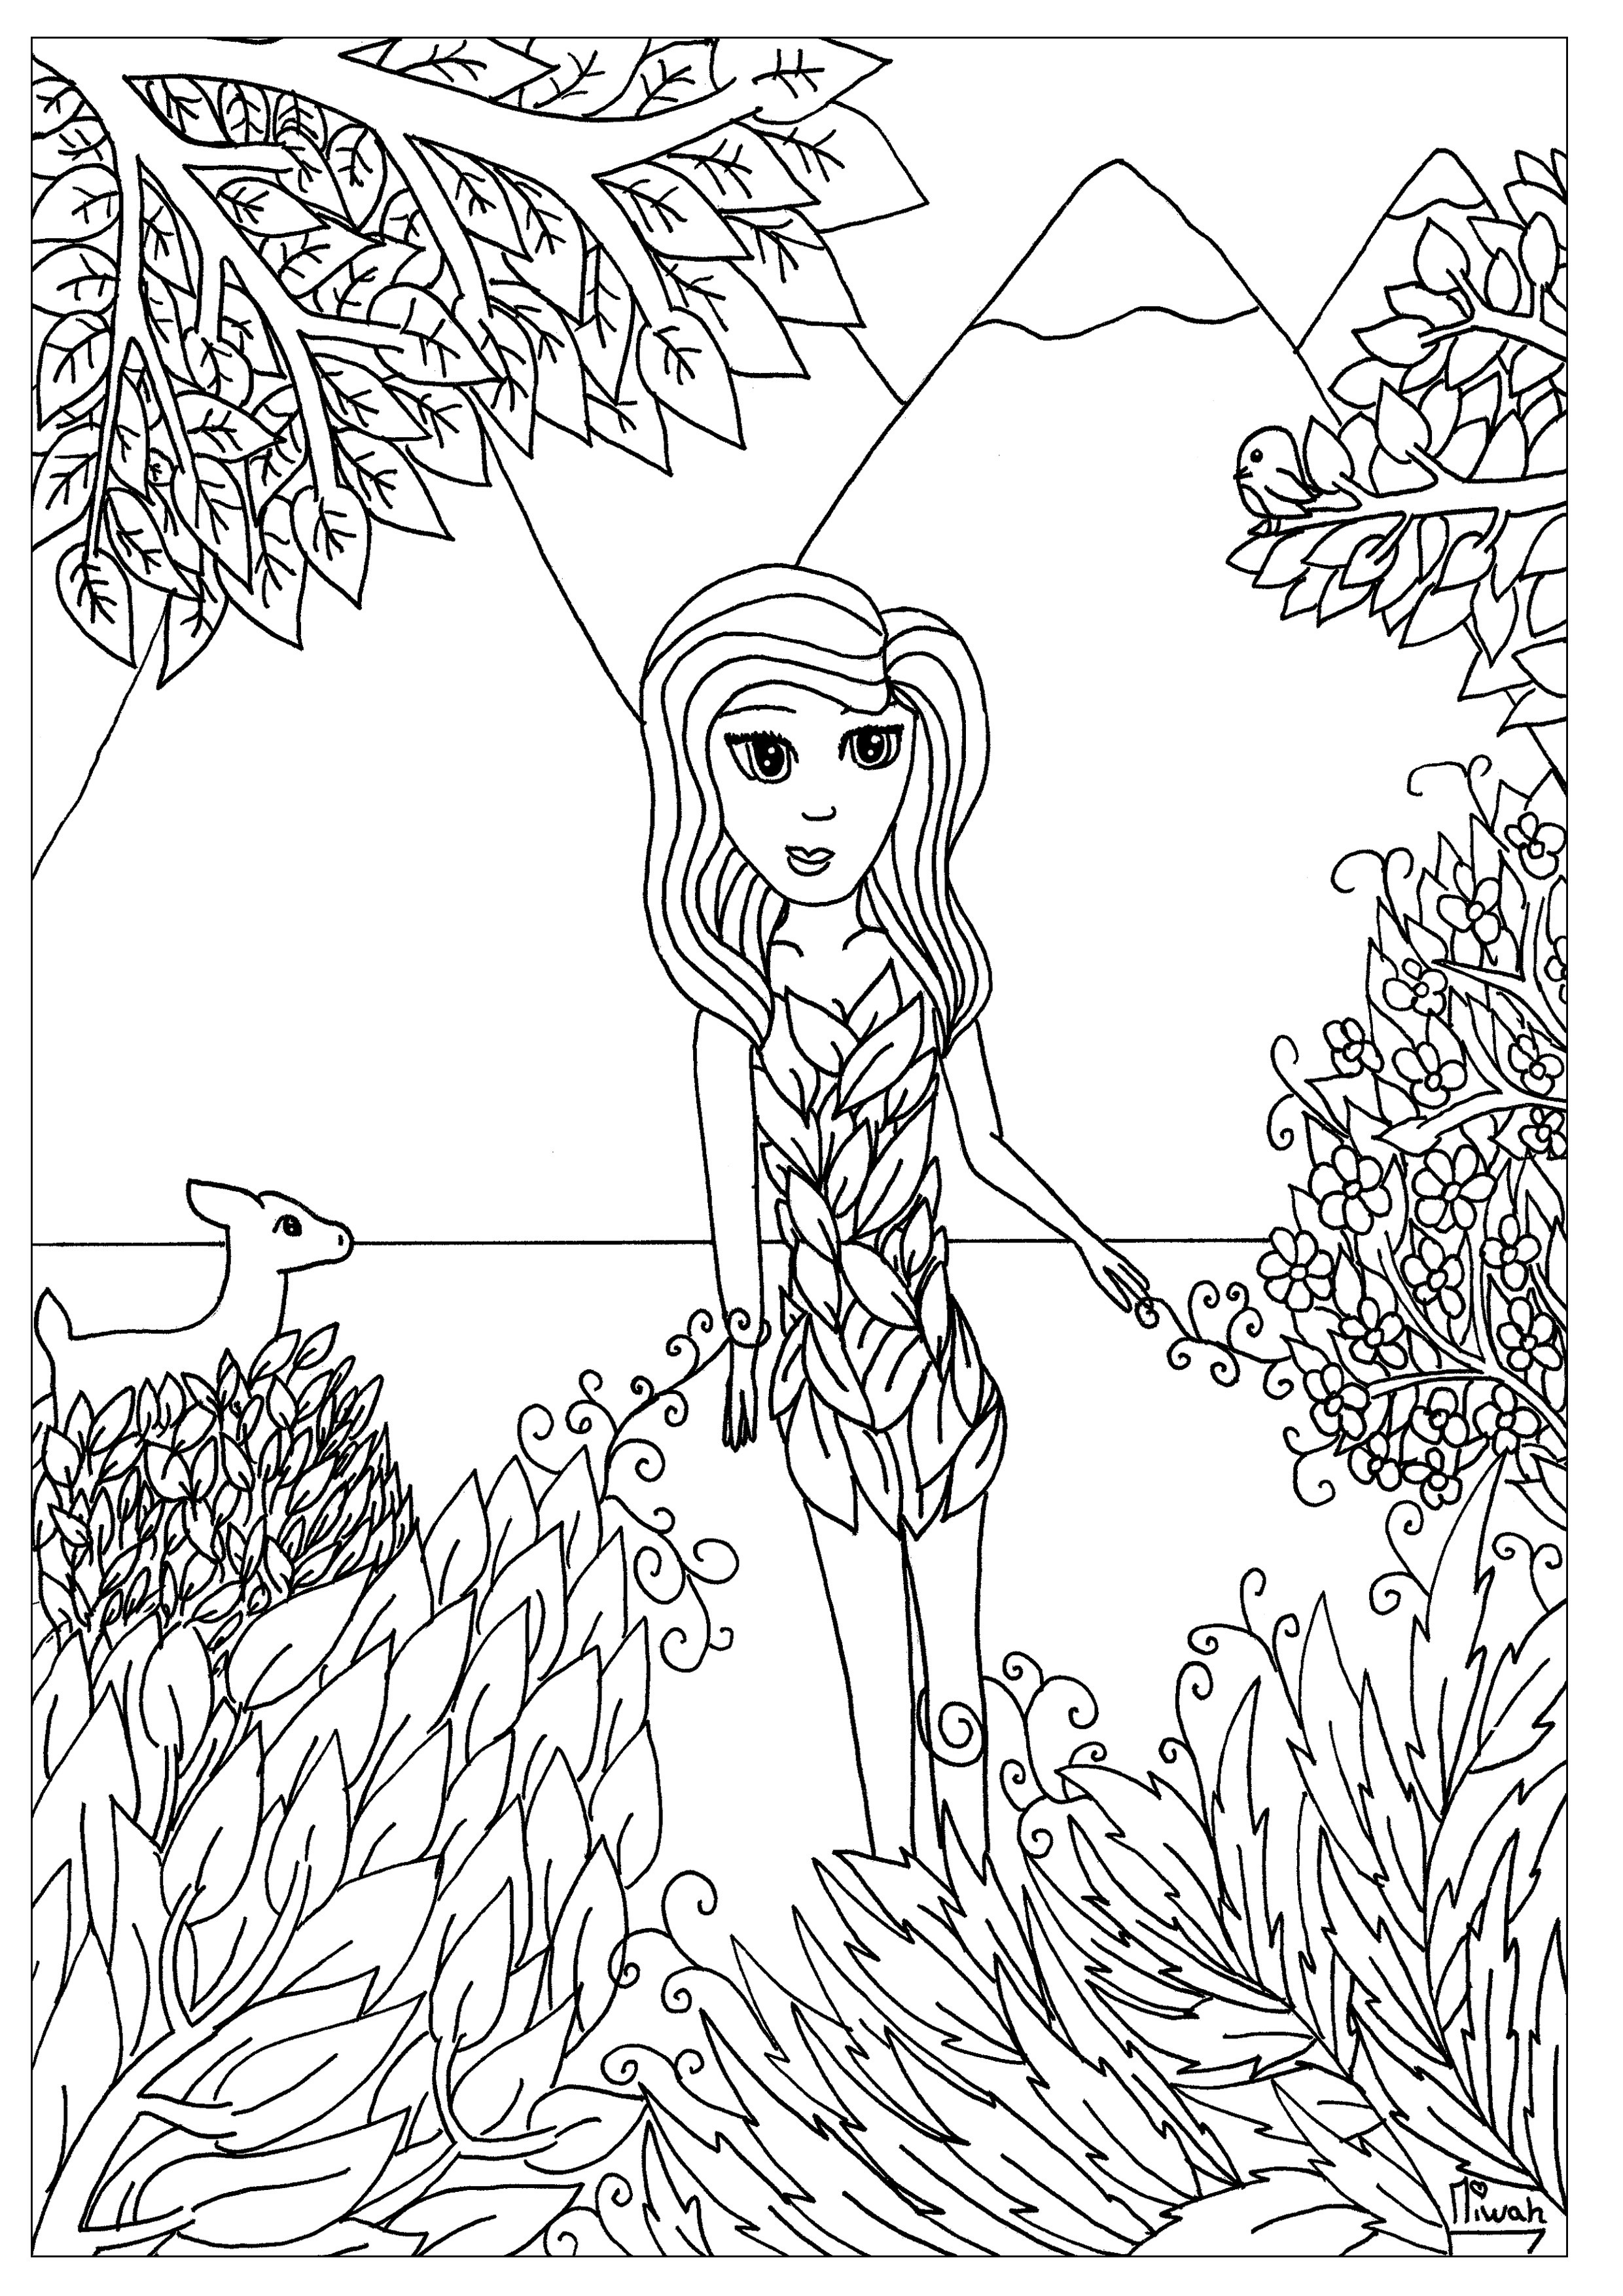 Flower Girl Coloring Pages
 Flower girl Anti stress Adult Coloring Pages